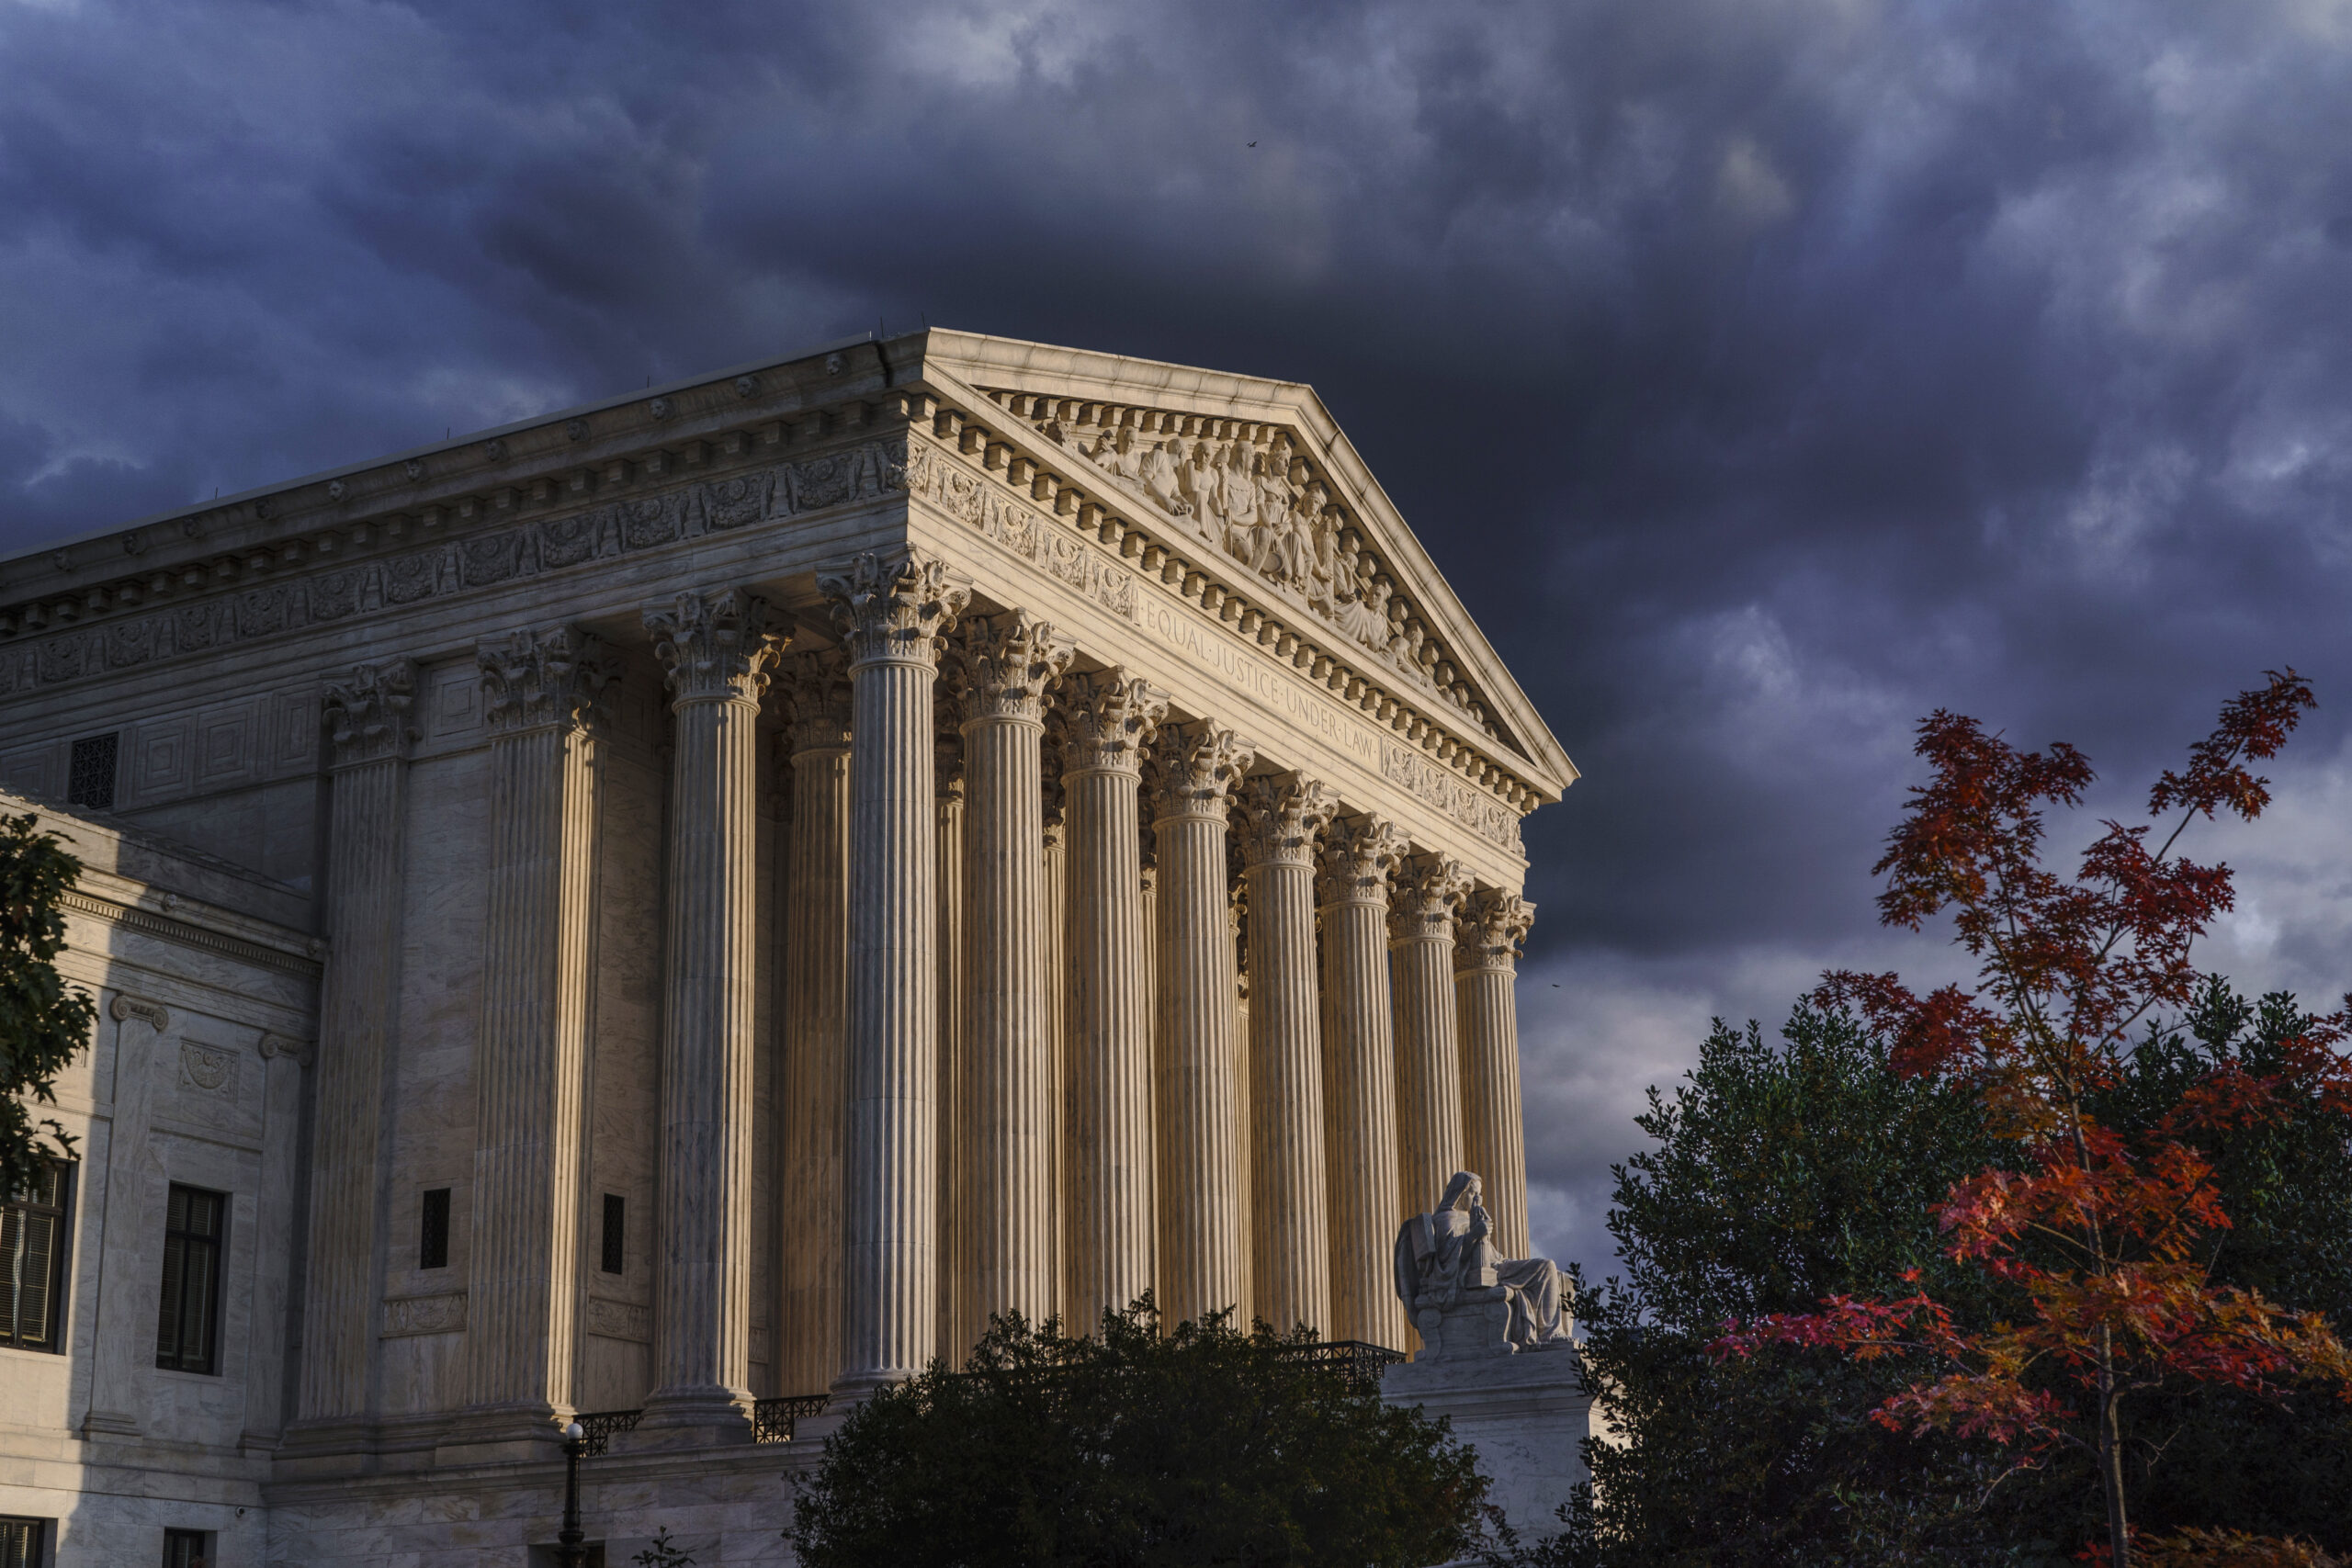 FILE - The Supreme Court is seen at dusk in Washington, Oct. 22, 2021. The Supreme Court is taking up challenges to a Texas law that has virtually ended abortion in the nation’s second largest state after six weeks of pregnancy. The justices are hearing arguments Monday, Nov. 1, in two cases over whether abortion providers or the Justice Department can mount federal court challenges to the law, which has an unusual enforcement scheme its defenders argue shield it from federal court review. (AP Photo/J. Scott Applewhite, File)